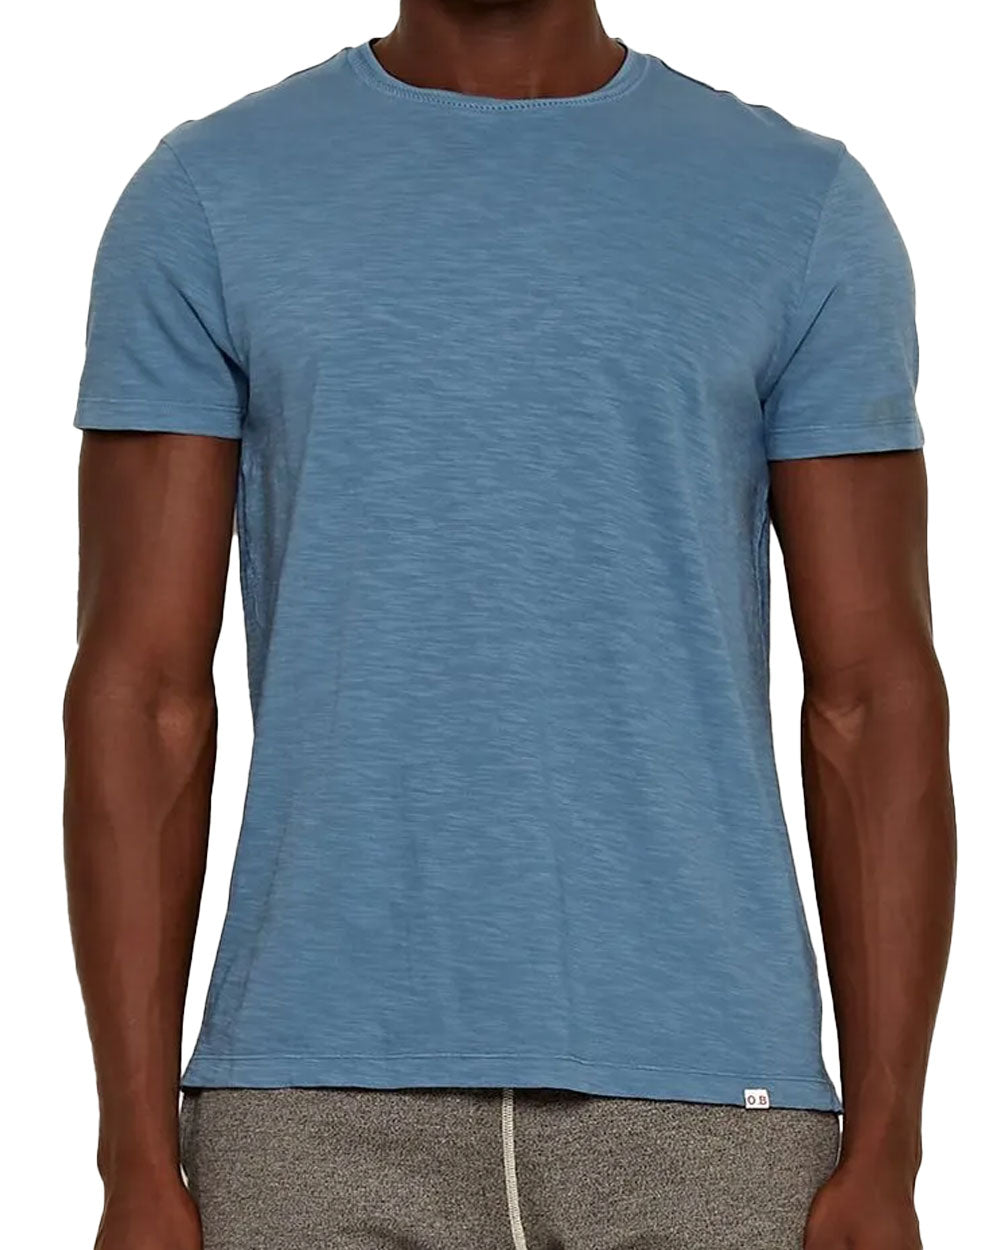 Classic Fit T-Shirt in Blue Smoke